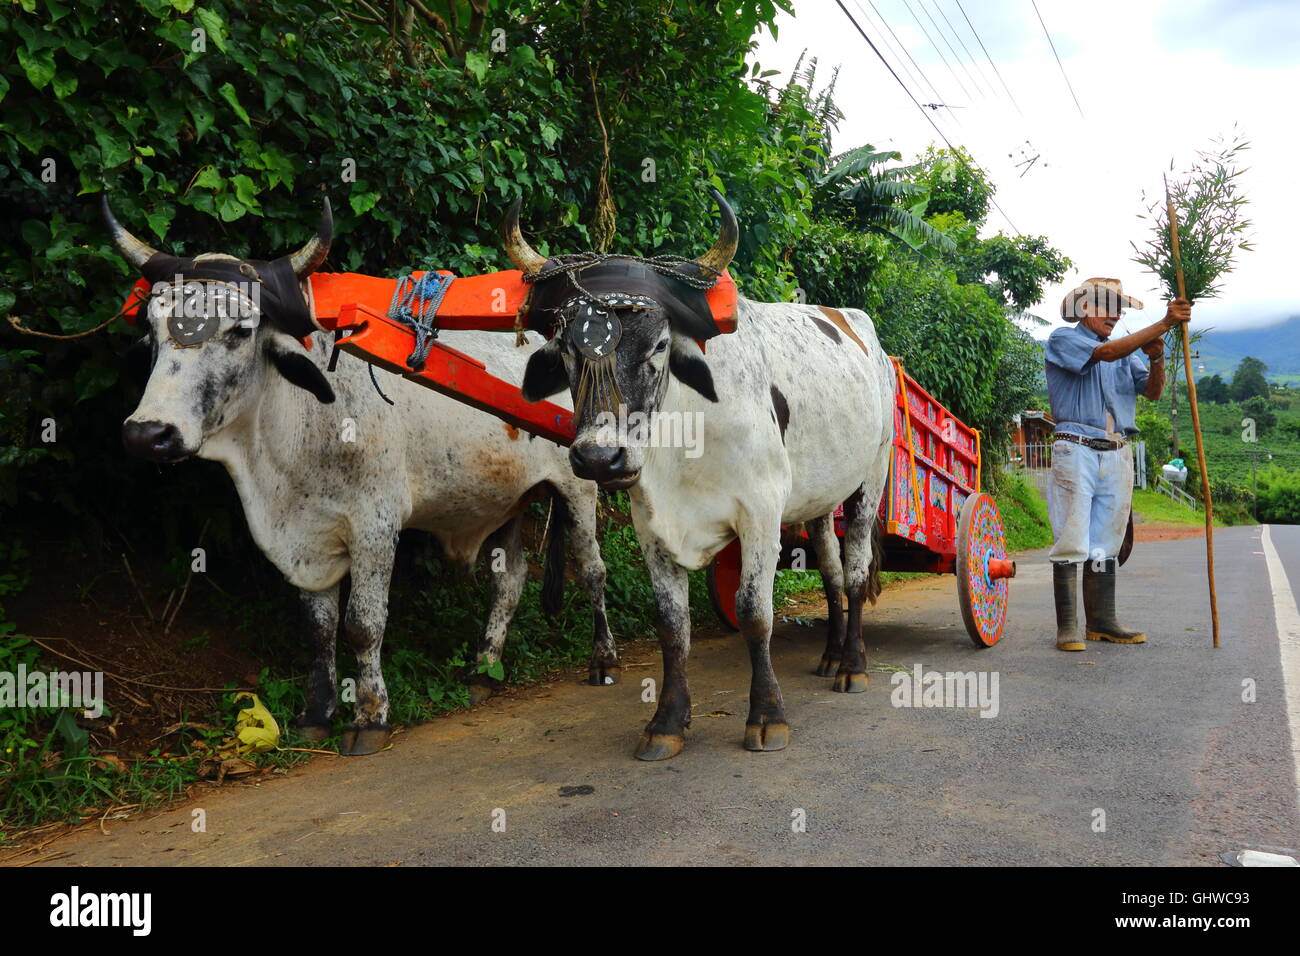 A Costa Rican man and his traditional oxcart. Alajuela Province, Costa Rica Stock Photo